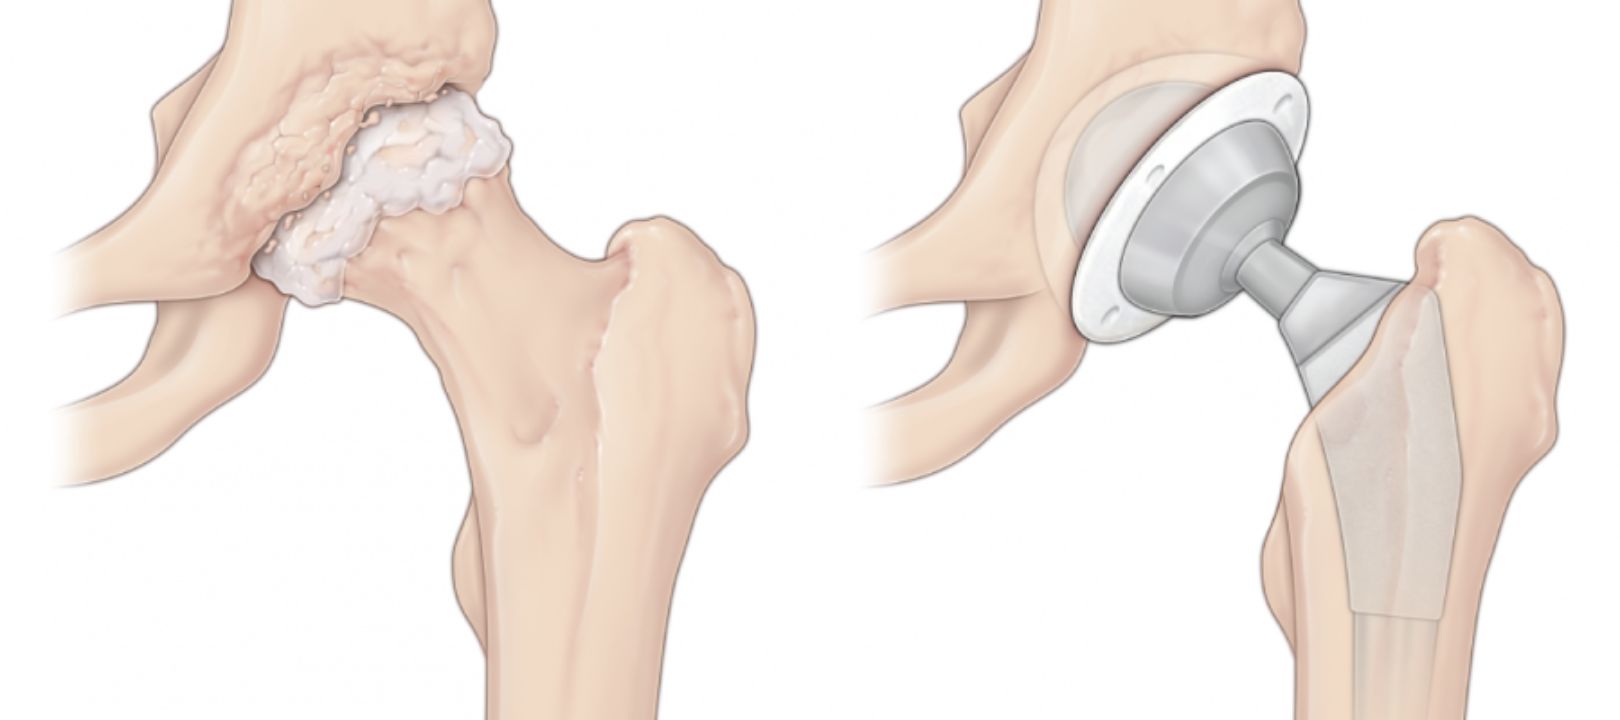 Before and after graphic of hip replacement surgery.